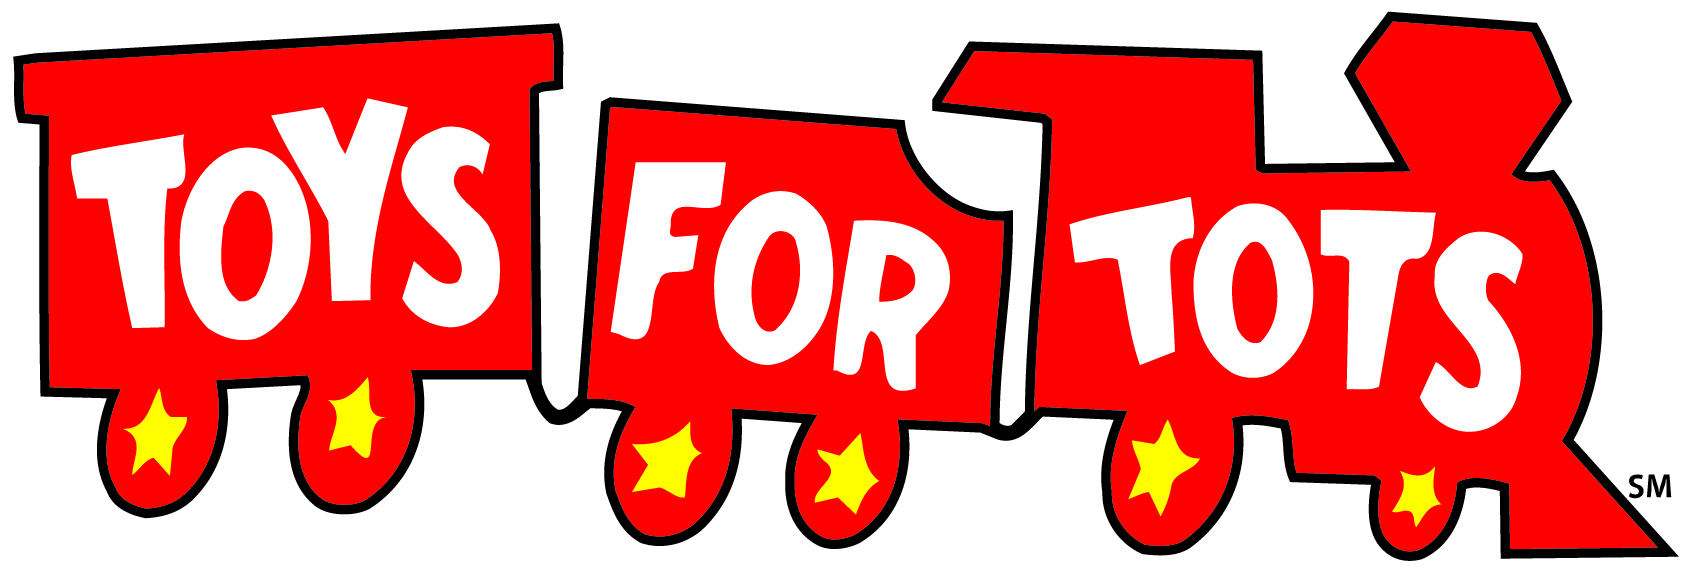 Toys For Tots Christmas Logo Images  Pictures - Becuo